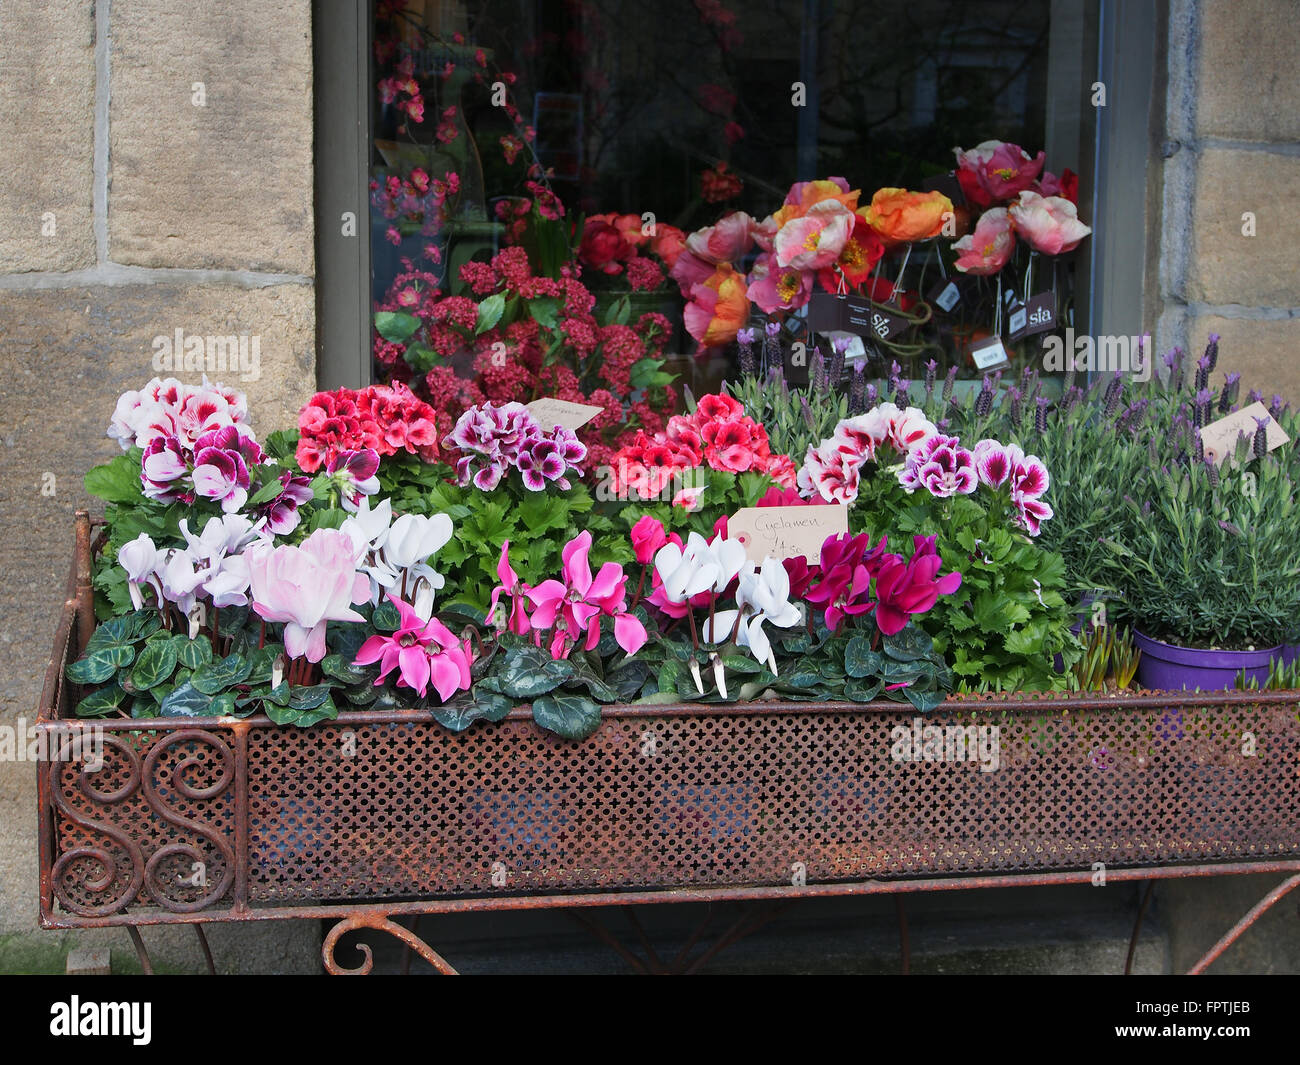 Display of pelargoniums and cyclamen in a container on the pavement outside a flower shop in Hebden Bridge, Yorkshire. Stock Photo